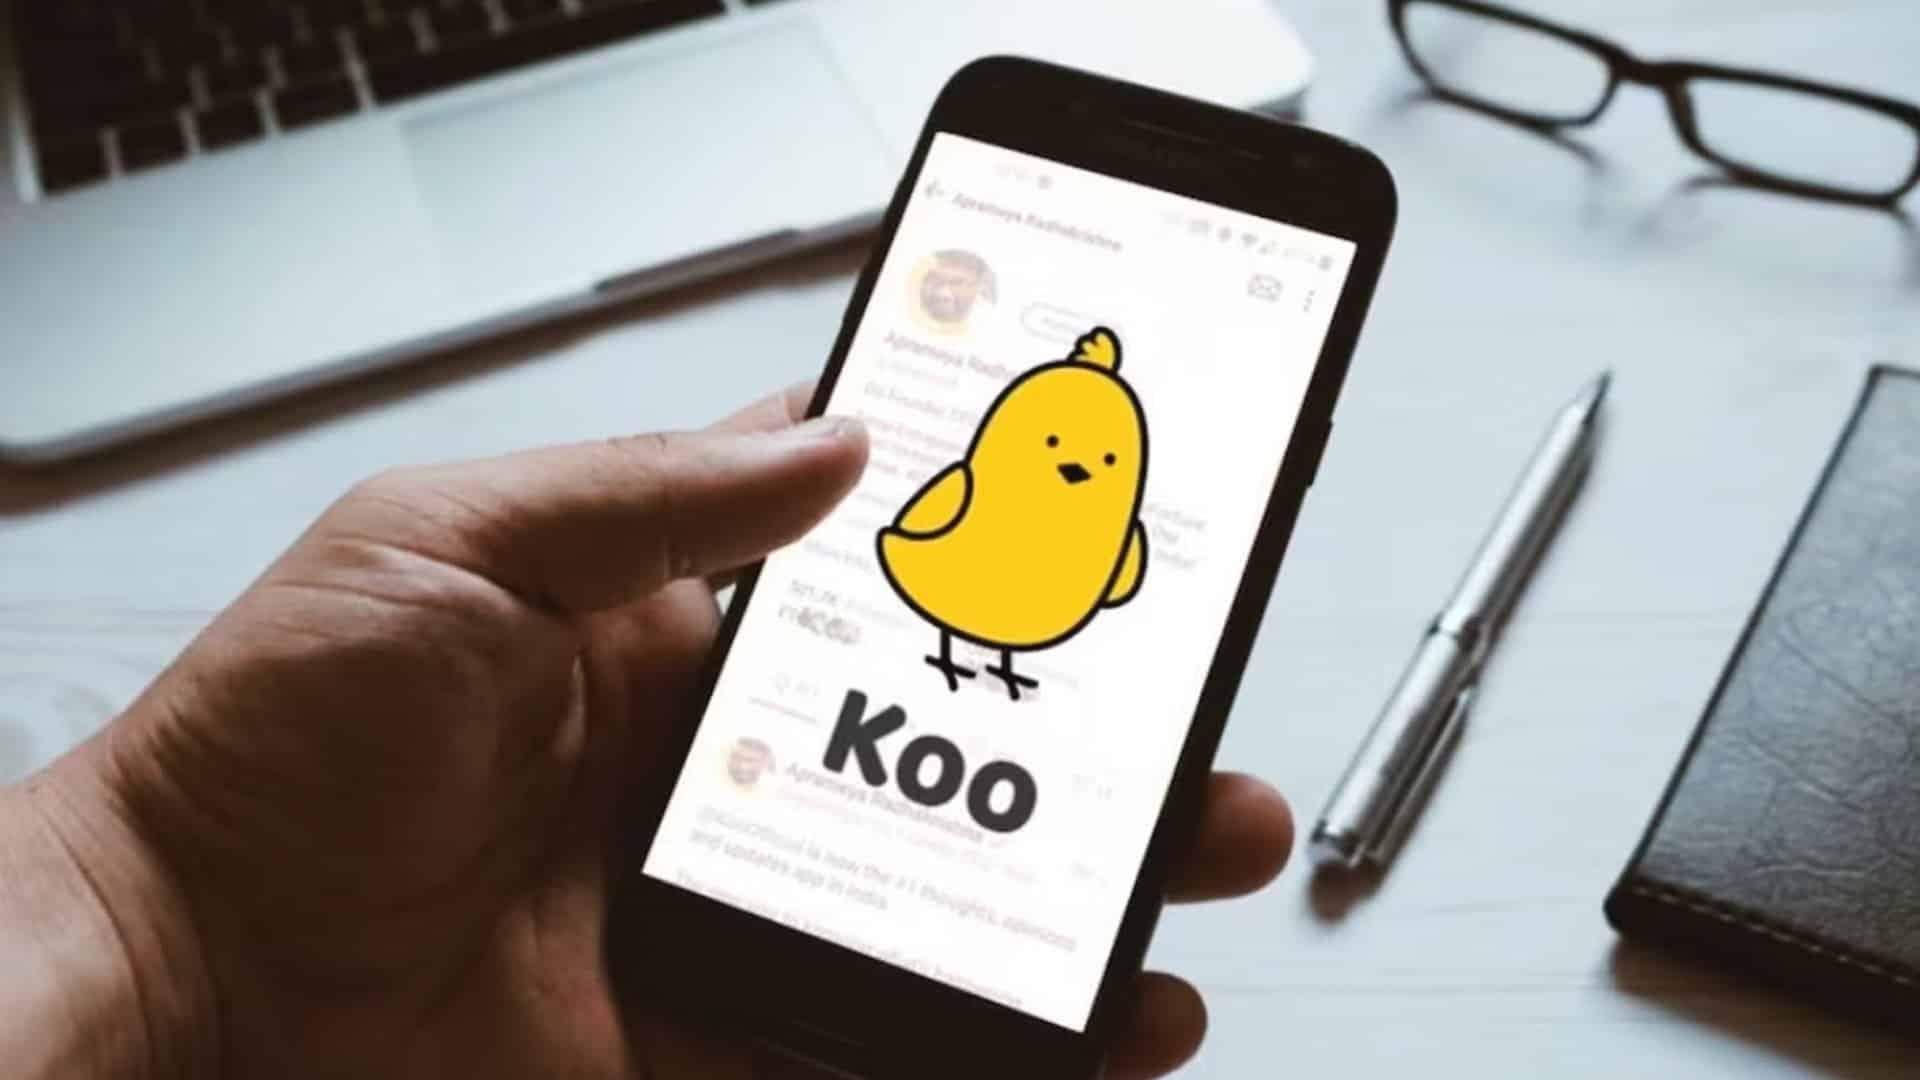 Koo launches new feature to enable creators to compose posts using ChatGPT